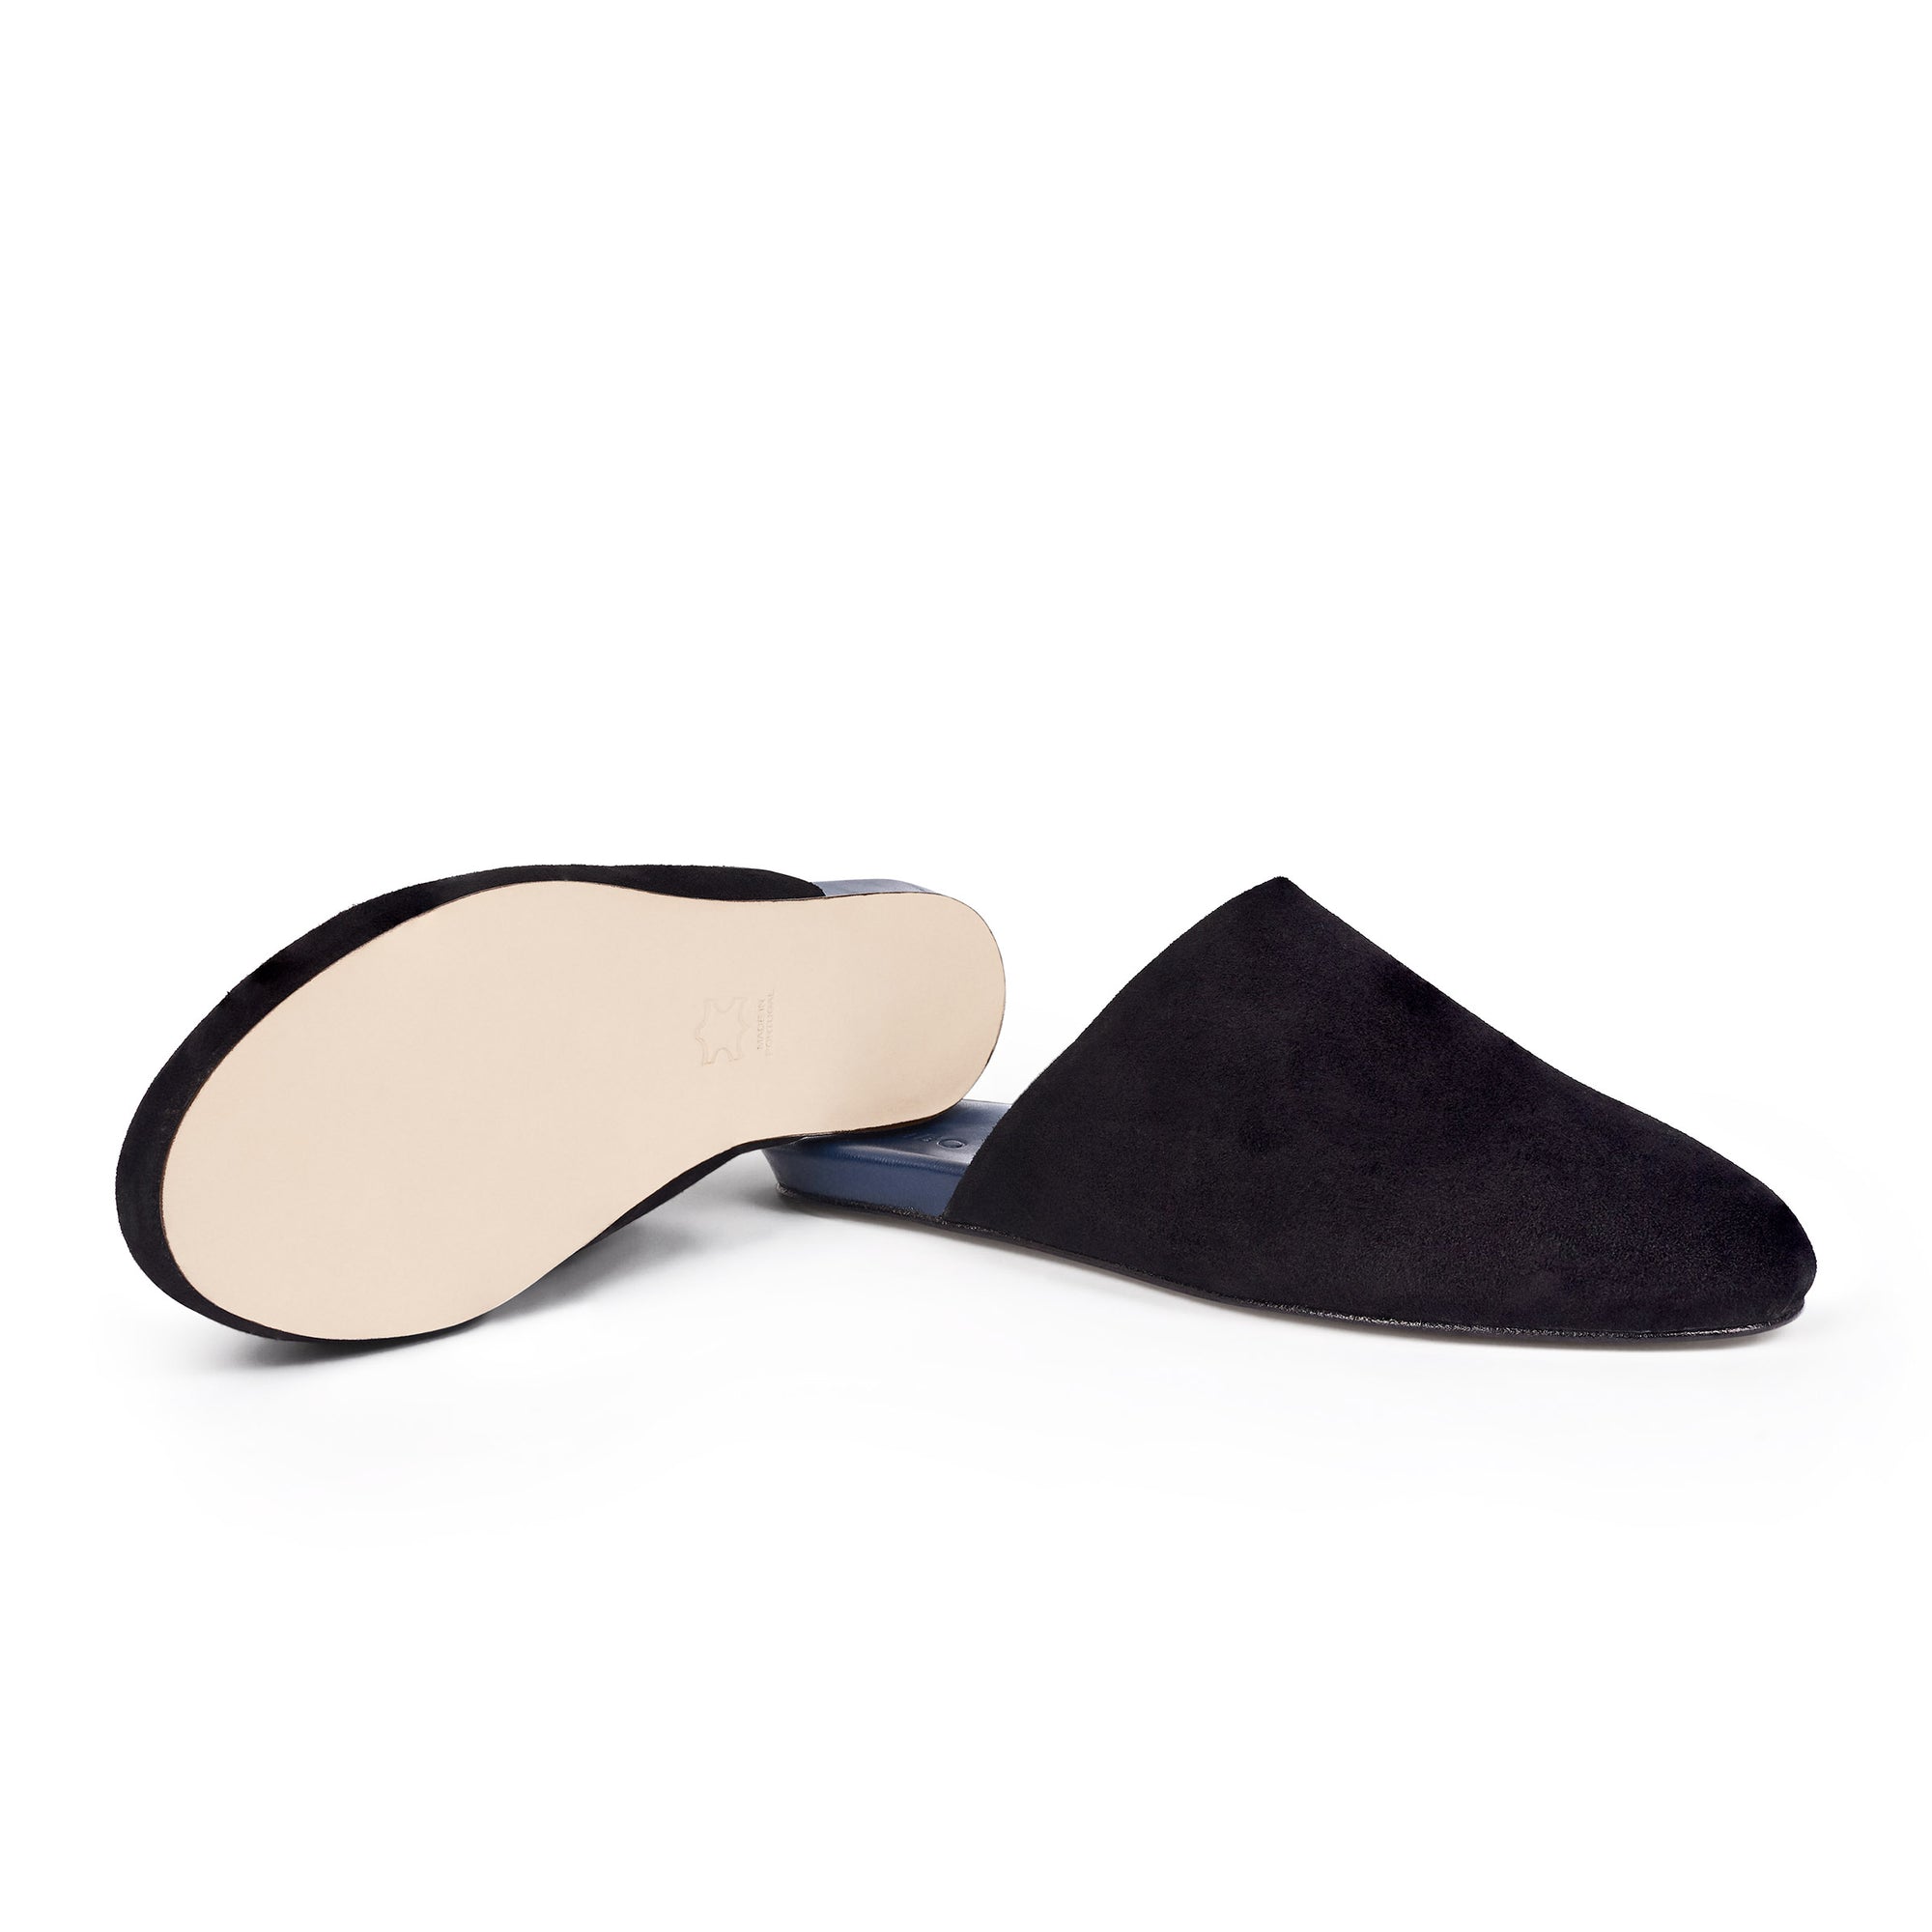 Inabo Men's Slider slipper in black suede showing the leather outer sole